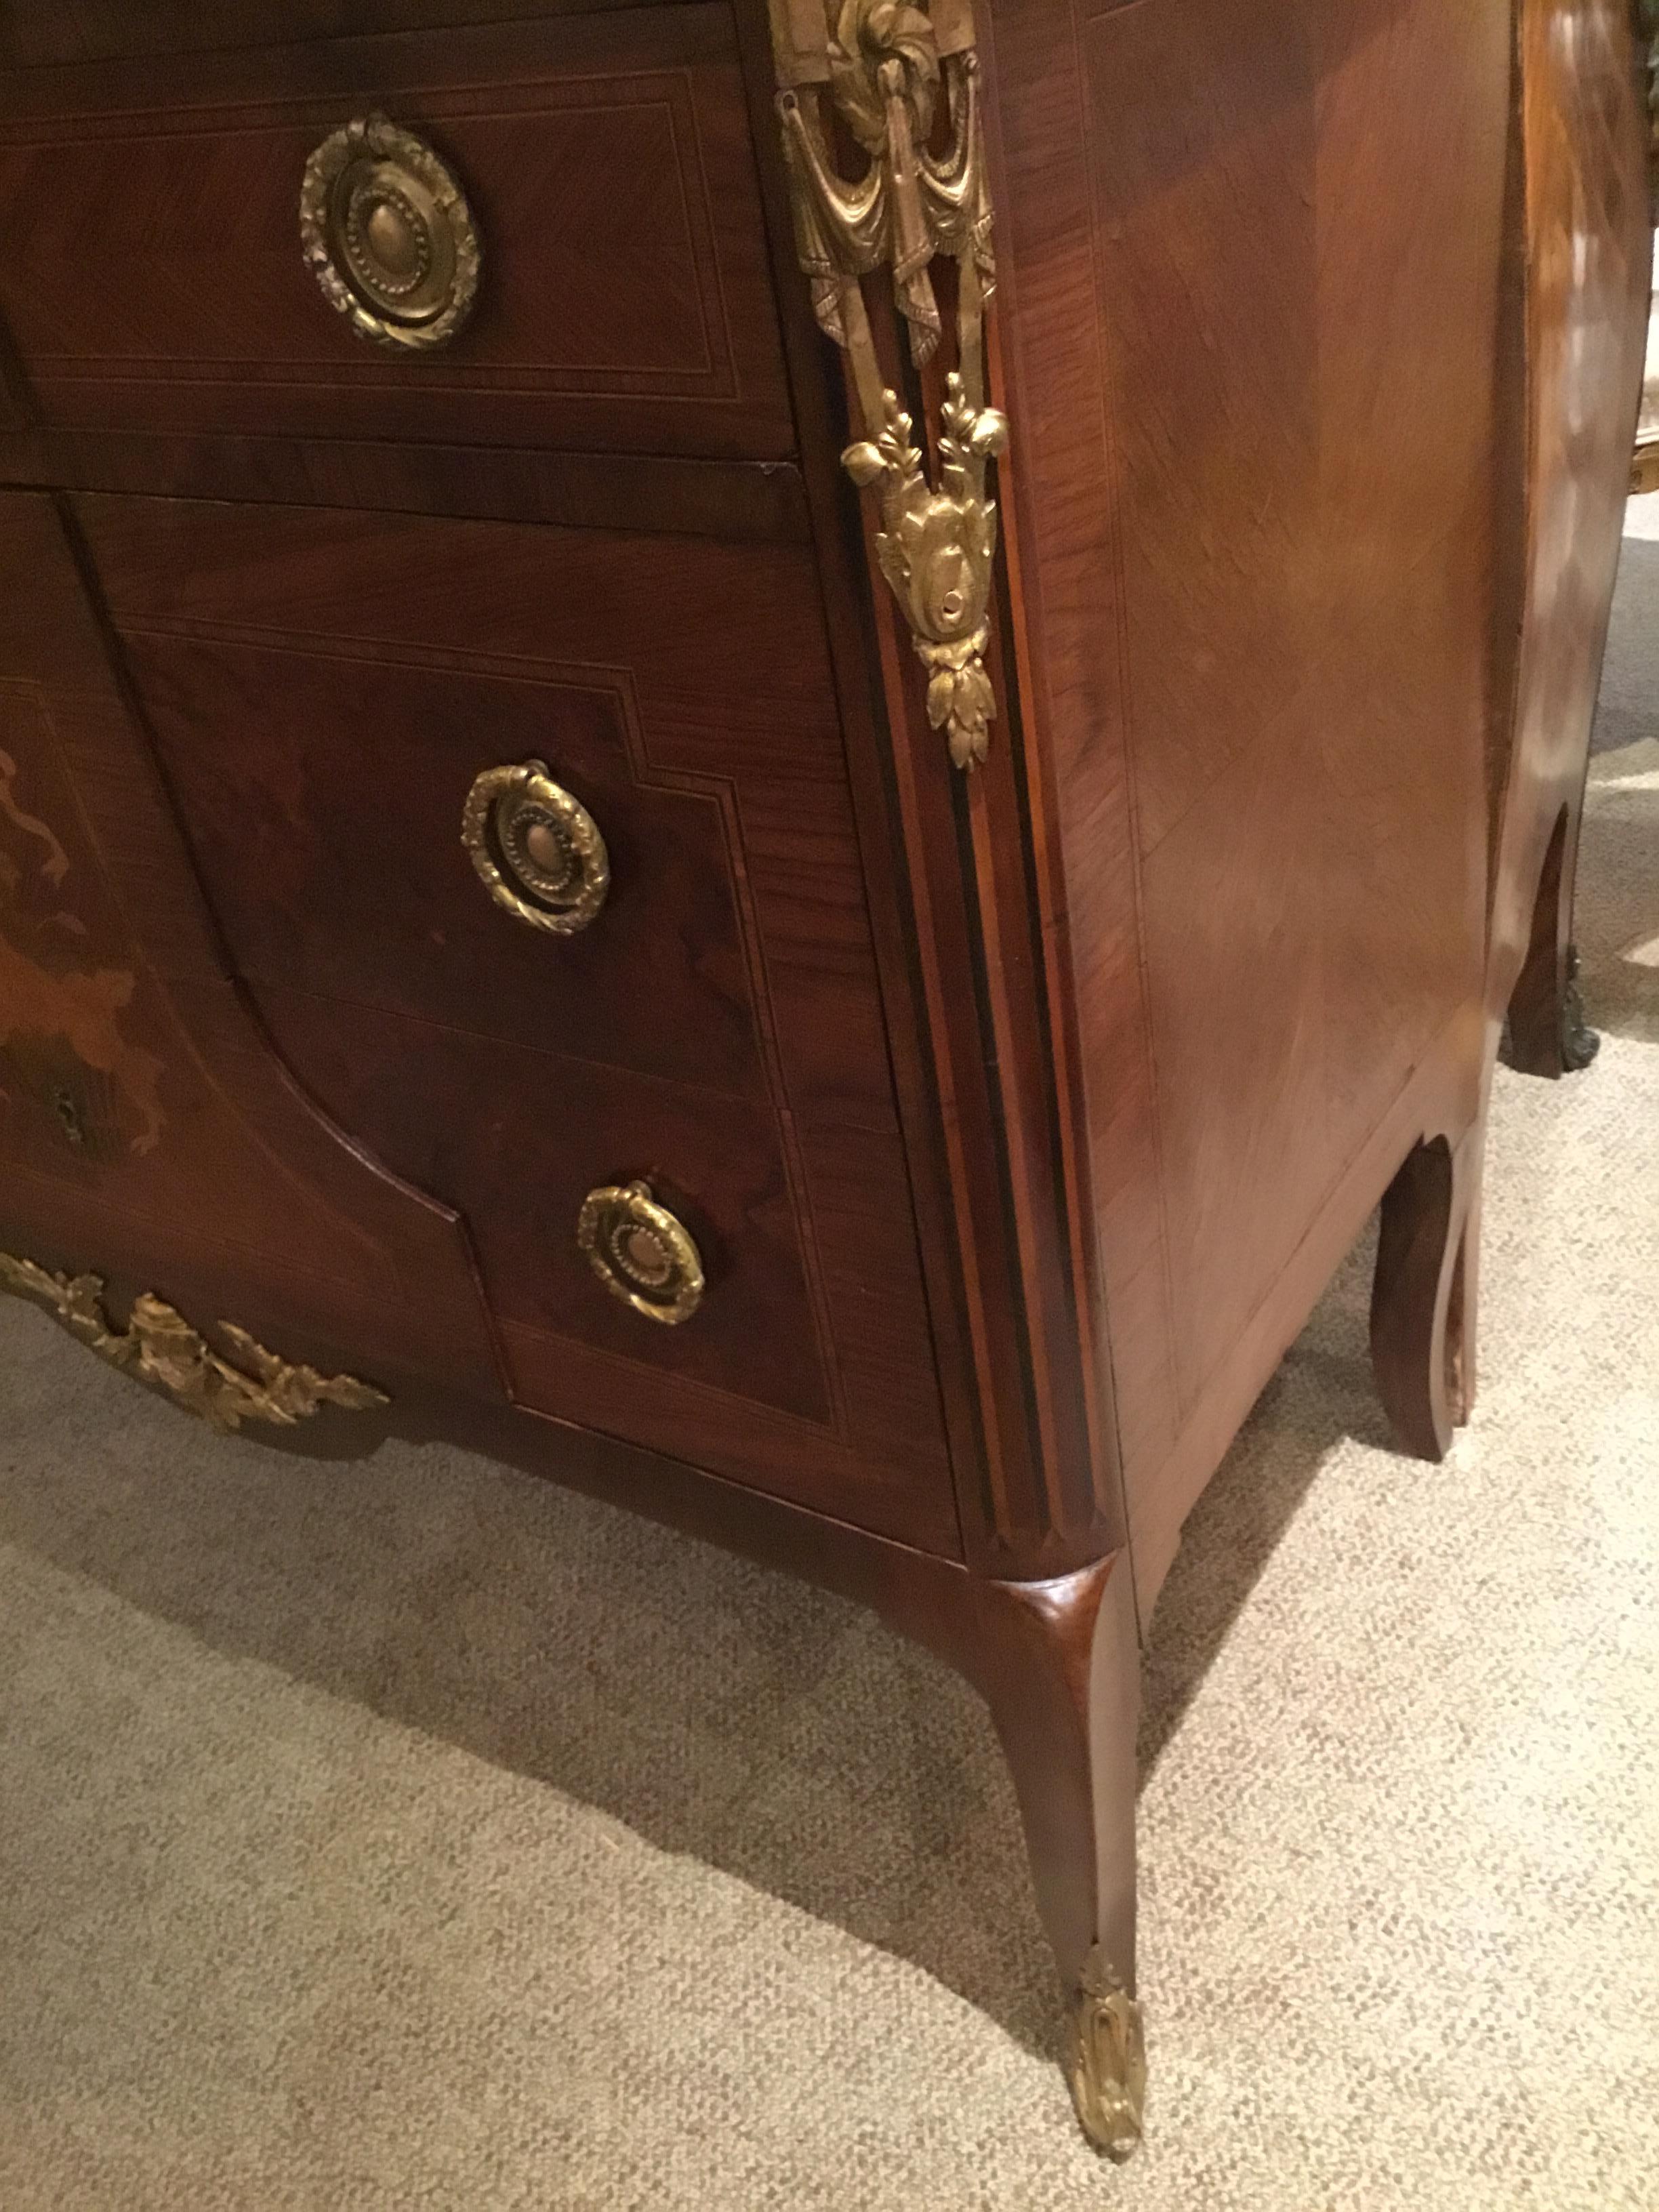 Excellent quality commode with three drawers having beautiful bronze pulls
And a lovely bronze doré plaque inset into the top drawer depicting
Angels and a country motif. The center of the cabinet has excellent marquetry 
Inlays of satinwood